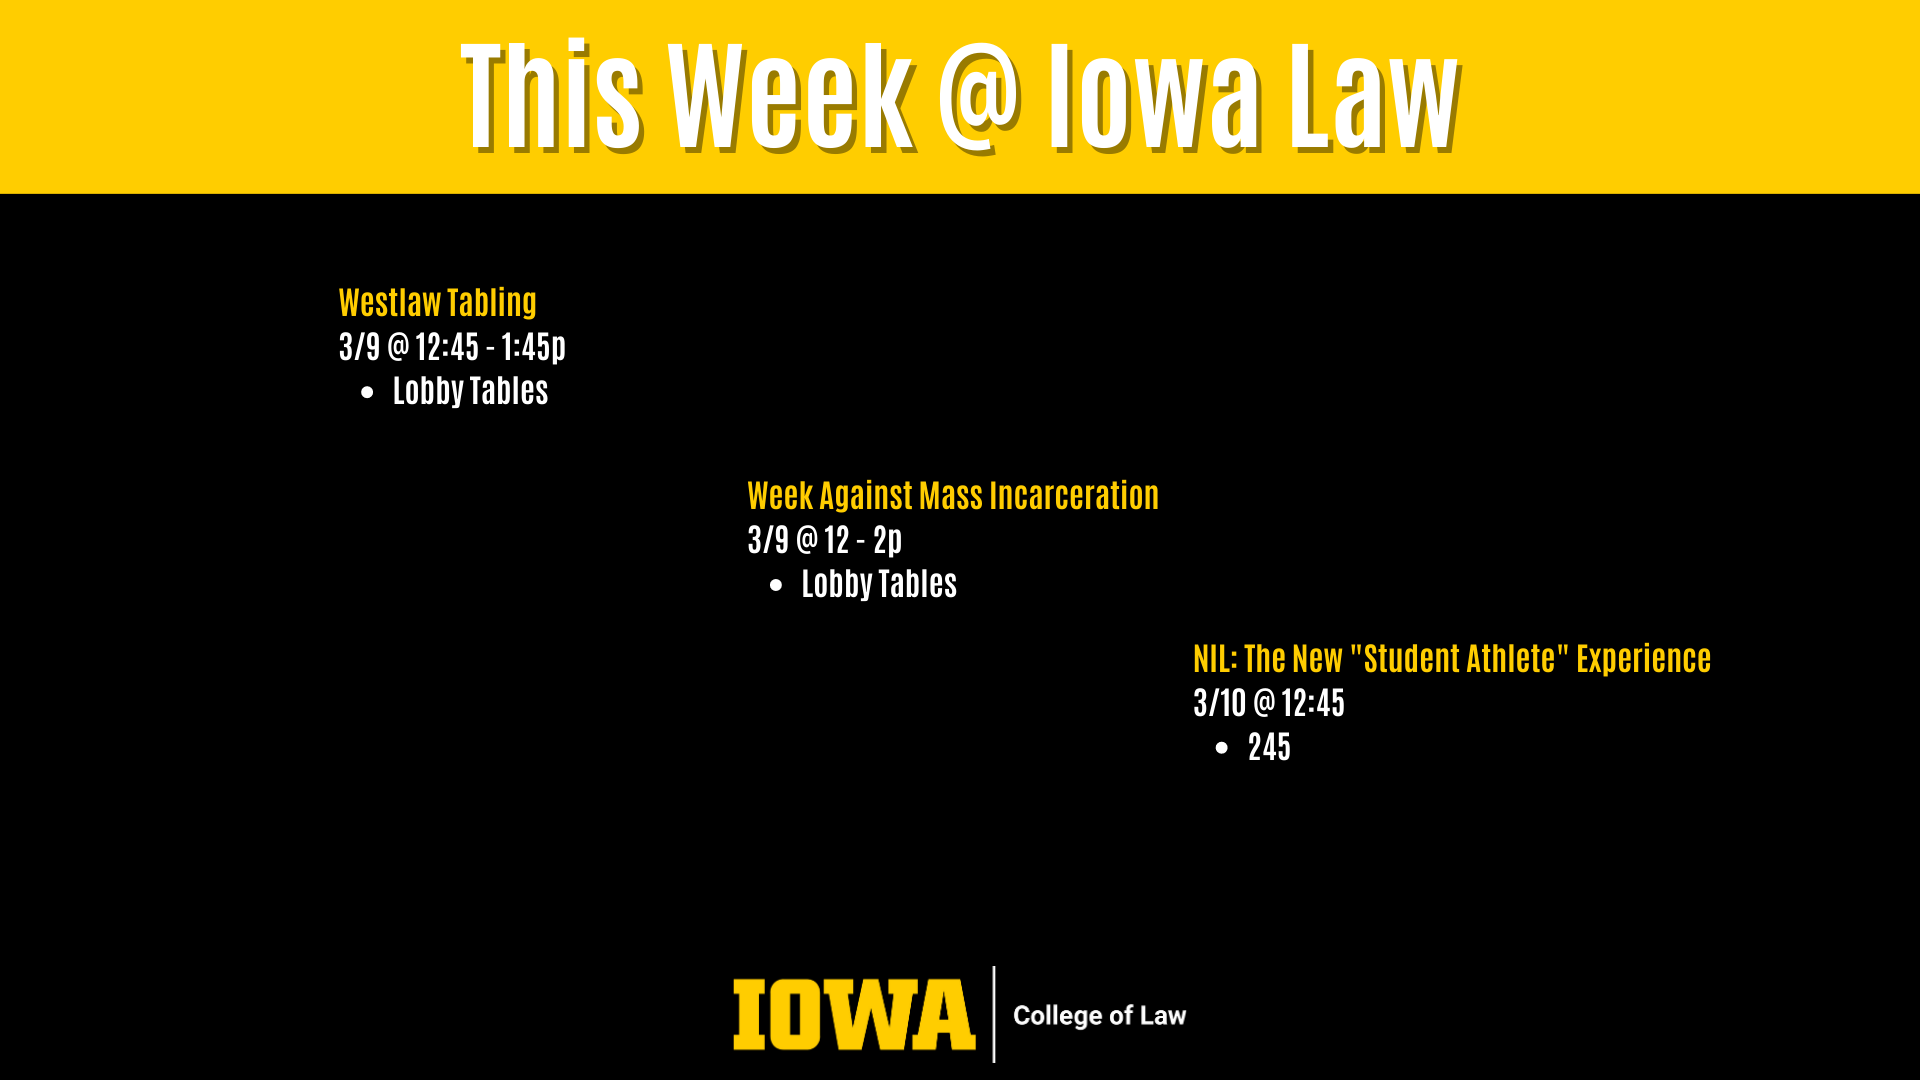 This Week @ Iowa Law Westlaw Tabling  3/9 @ 12:45 - 1:45p  Lobby Tables Week Against Mass Incarceration  3/9 @ 12 - 2p  Lobby Tables NIL: The New "Student Athlete" Experience  3/10 @ 12:45 245